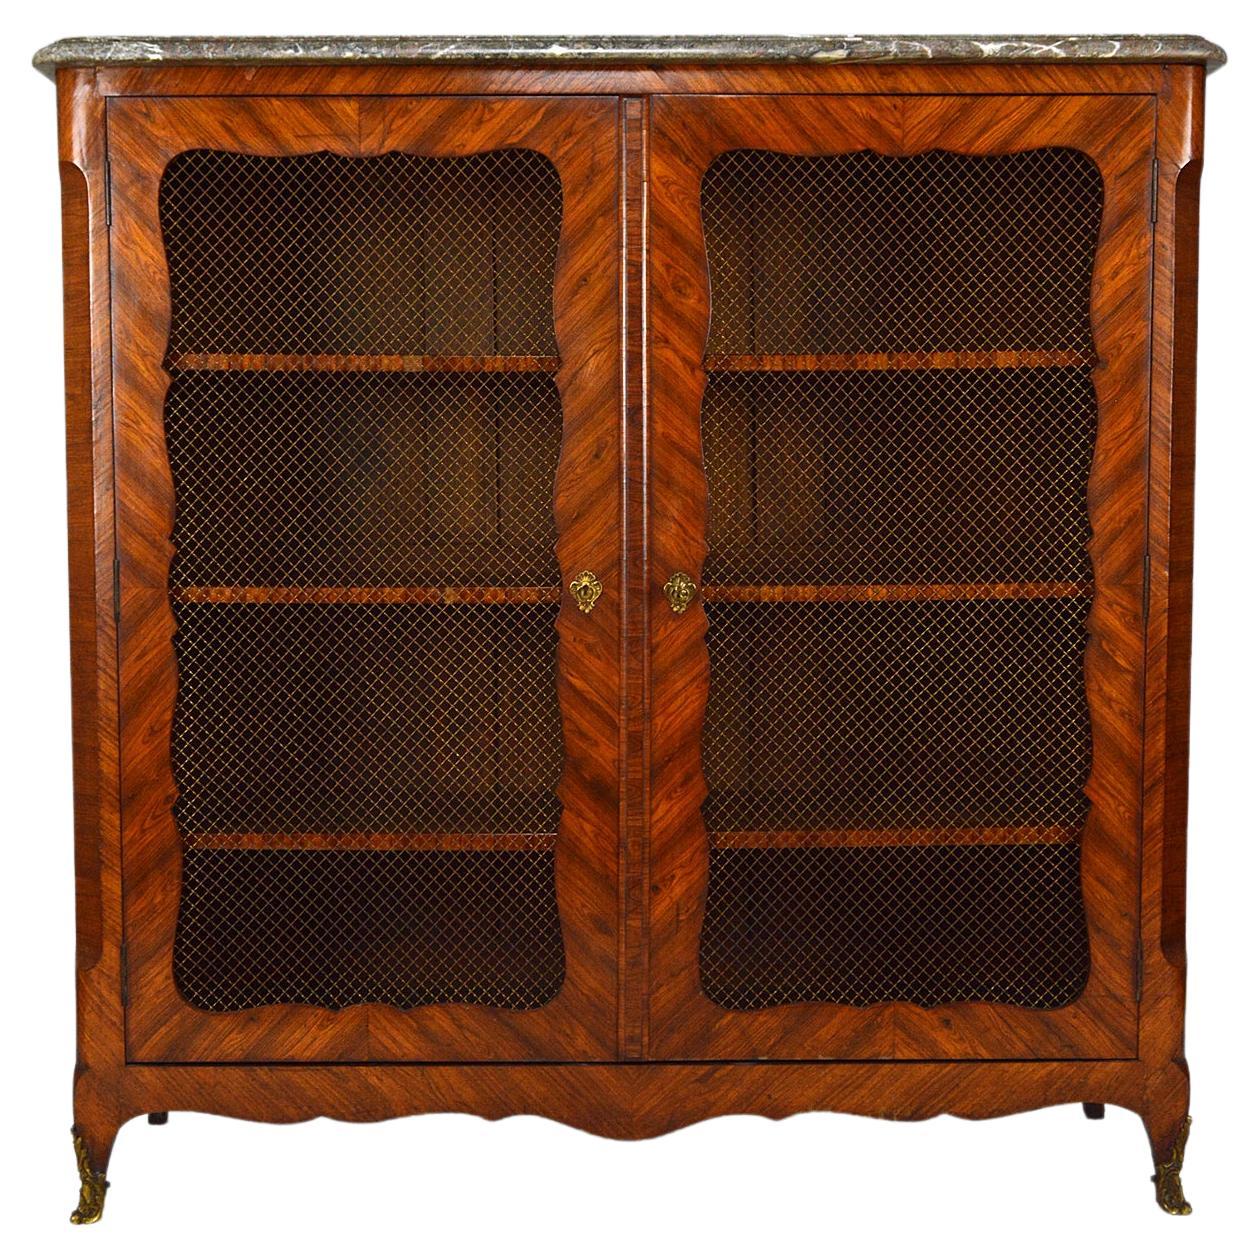 Louis XV Bookcase by Pierre Garnier with Inlay Wood and Marble Top, circa 1750